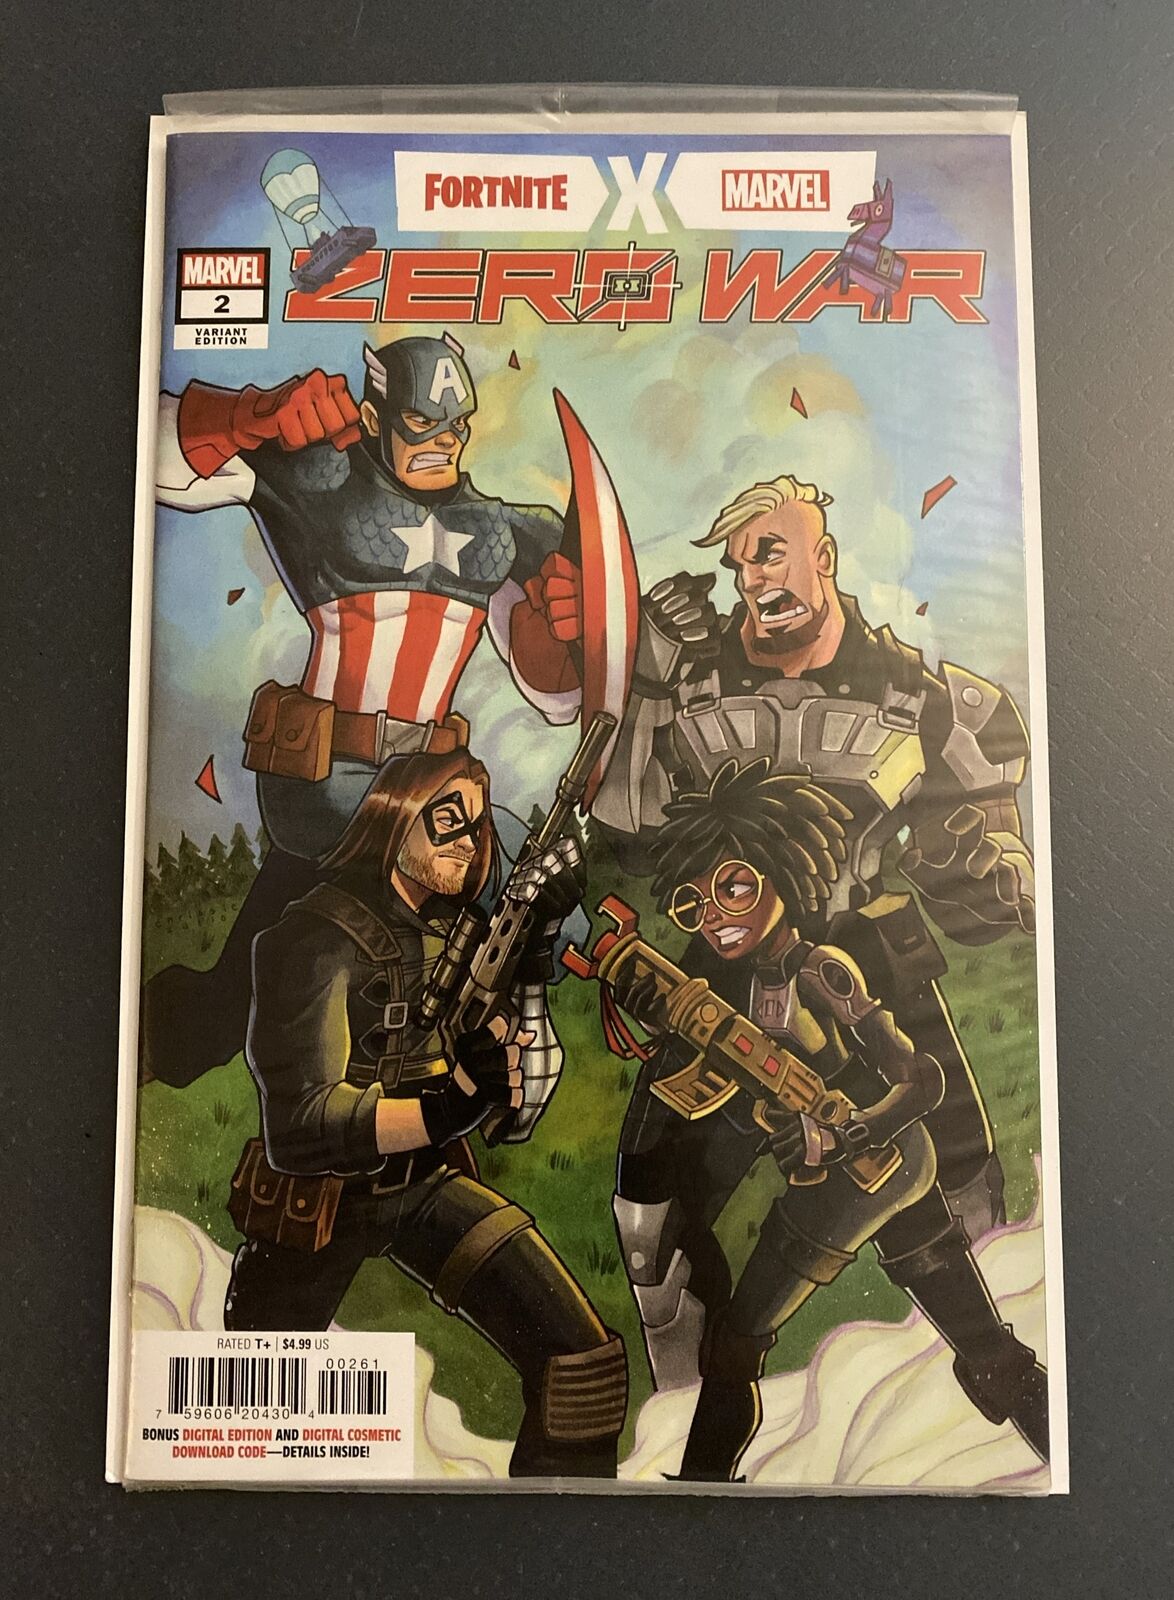 Fortnite X Marvel Zero War #2F Zullo Variant NM 2022 Polybag With Code